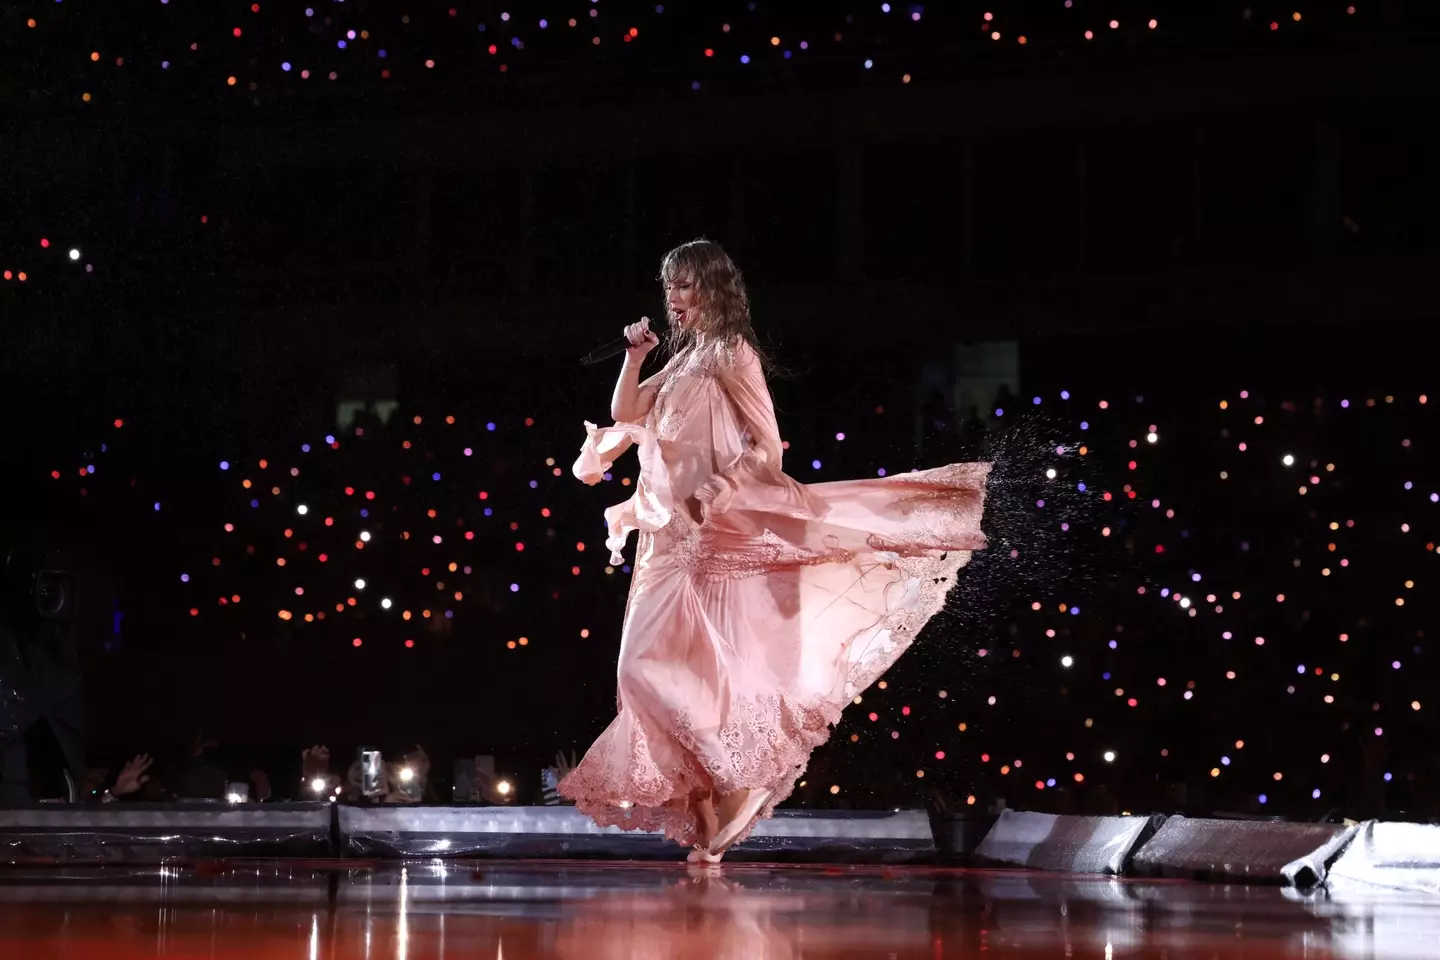 Swift performs in the second night in Rio.